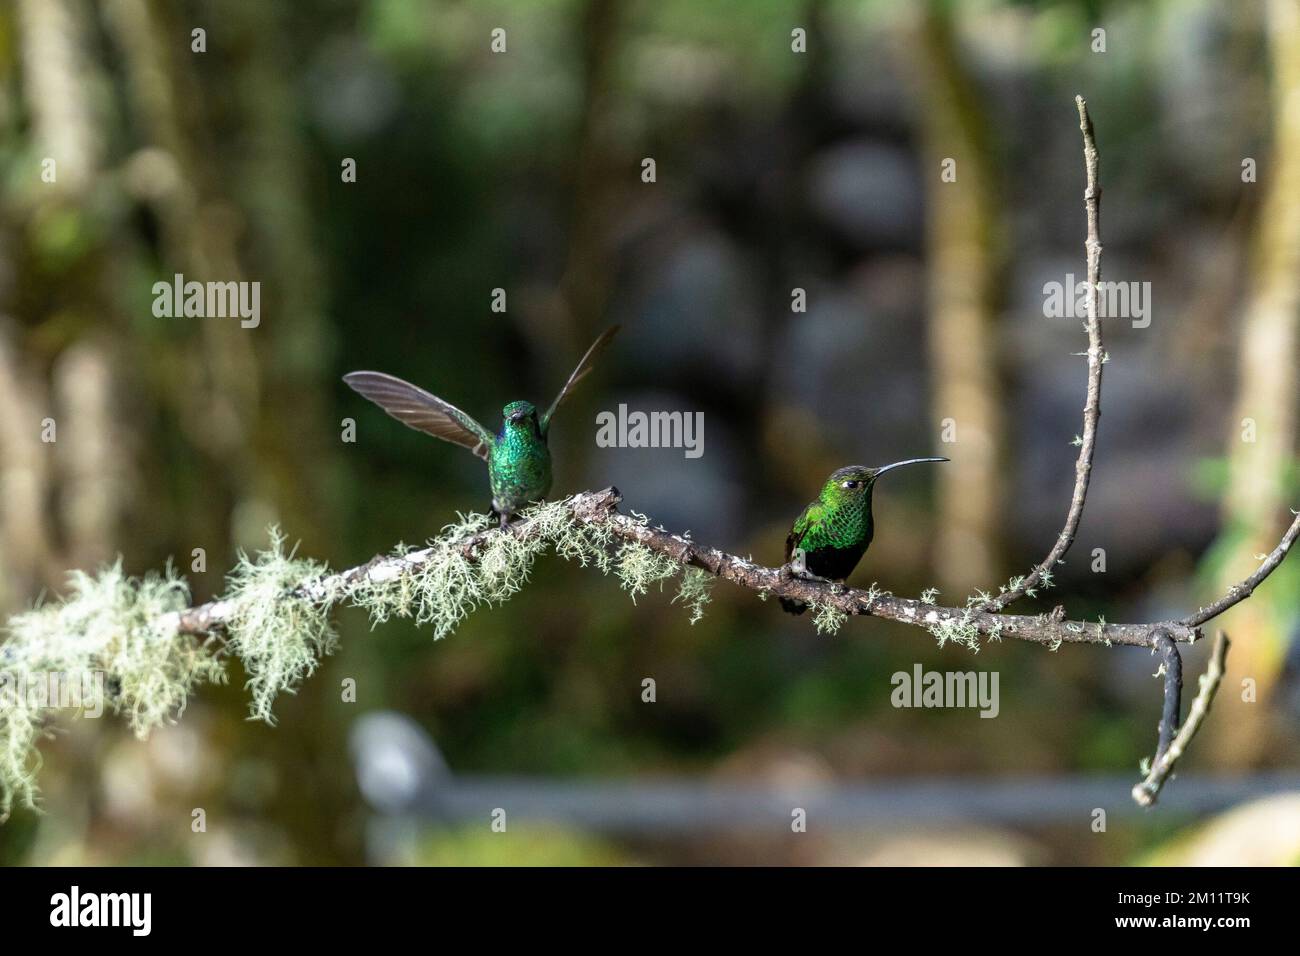 South America, Colombia, Department of Antioquia, Colombian Andes, Urrao, Hummingbirds at ramo del Sol Stock Photo